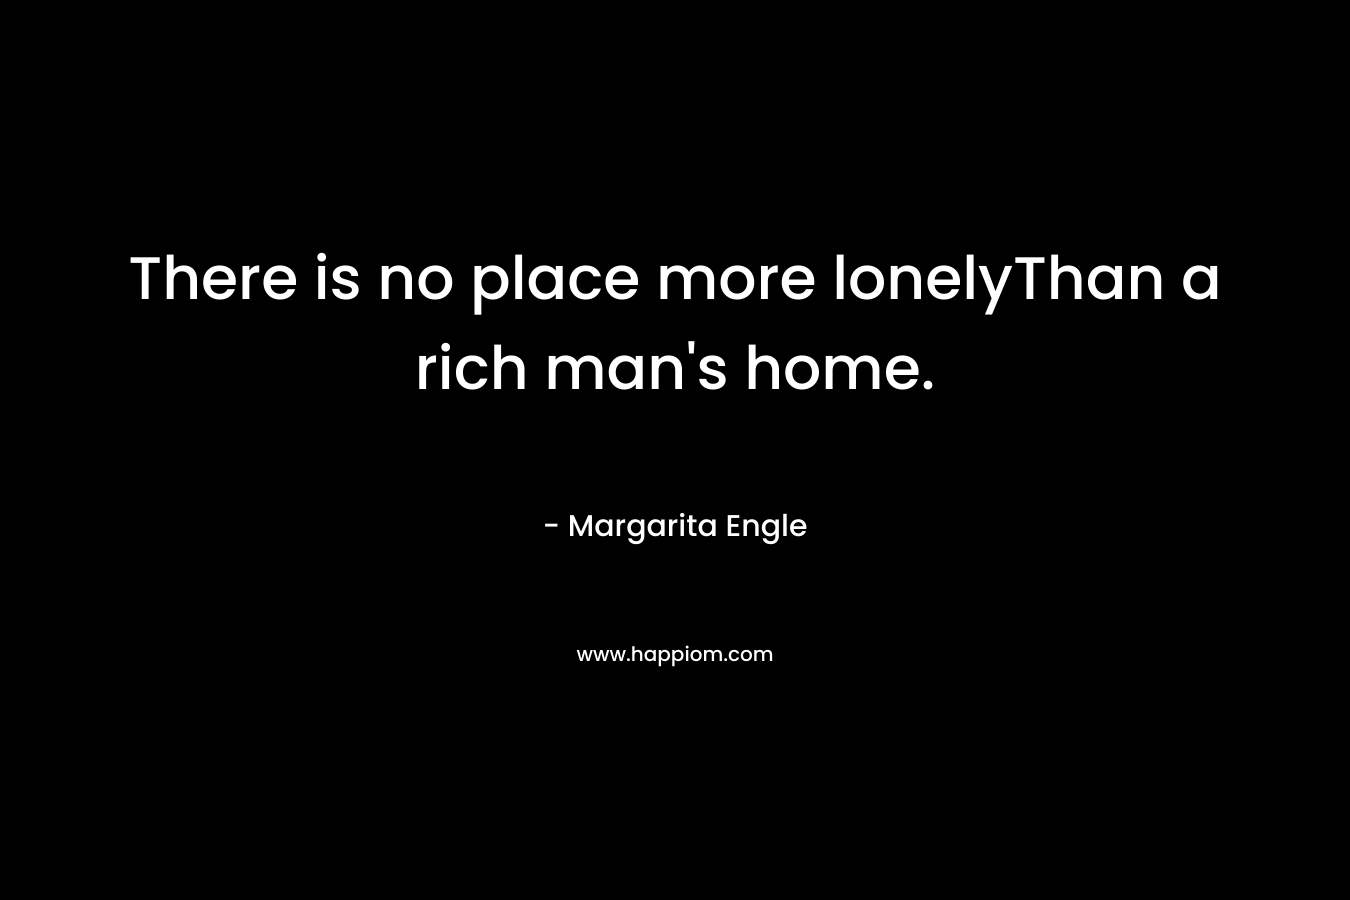 There is no place more lonelyThan a rich man's home.